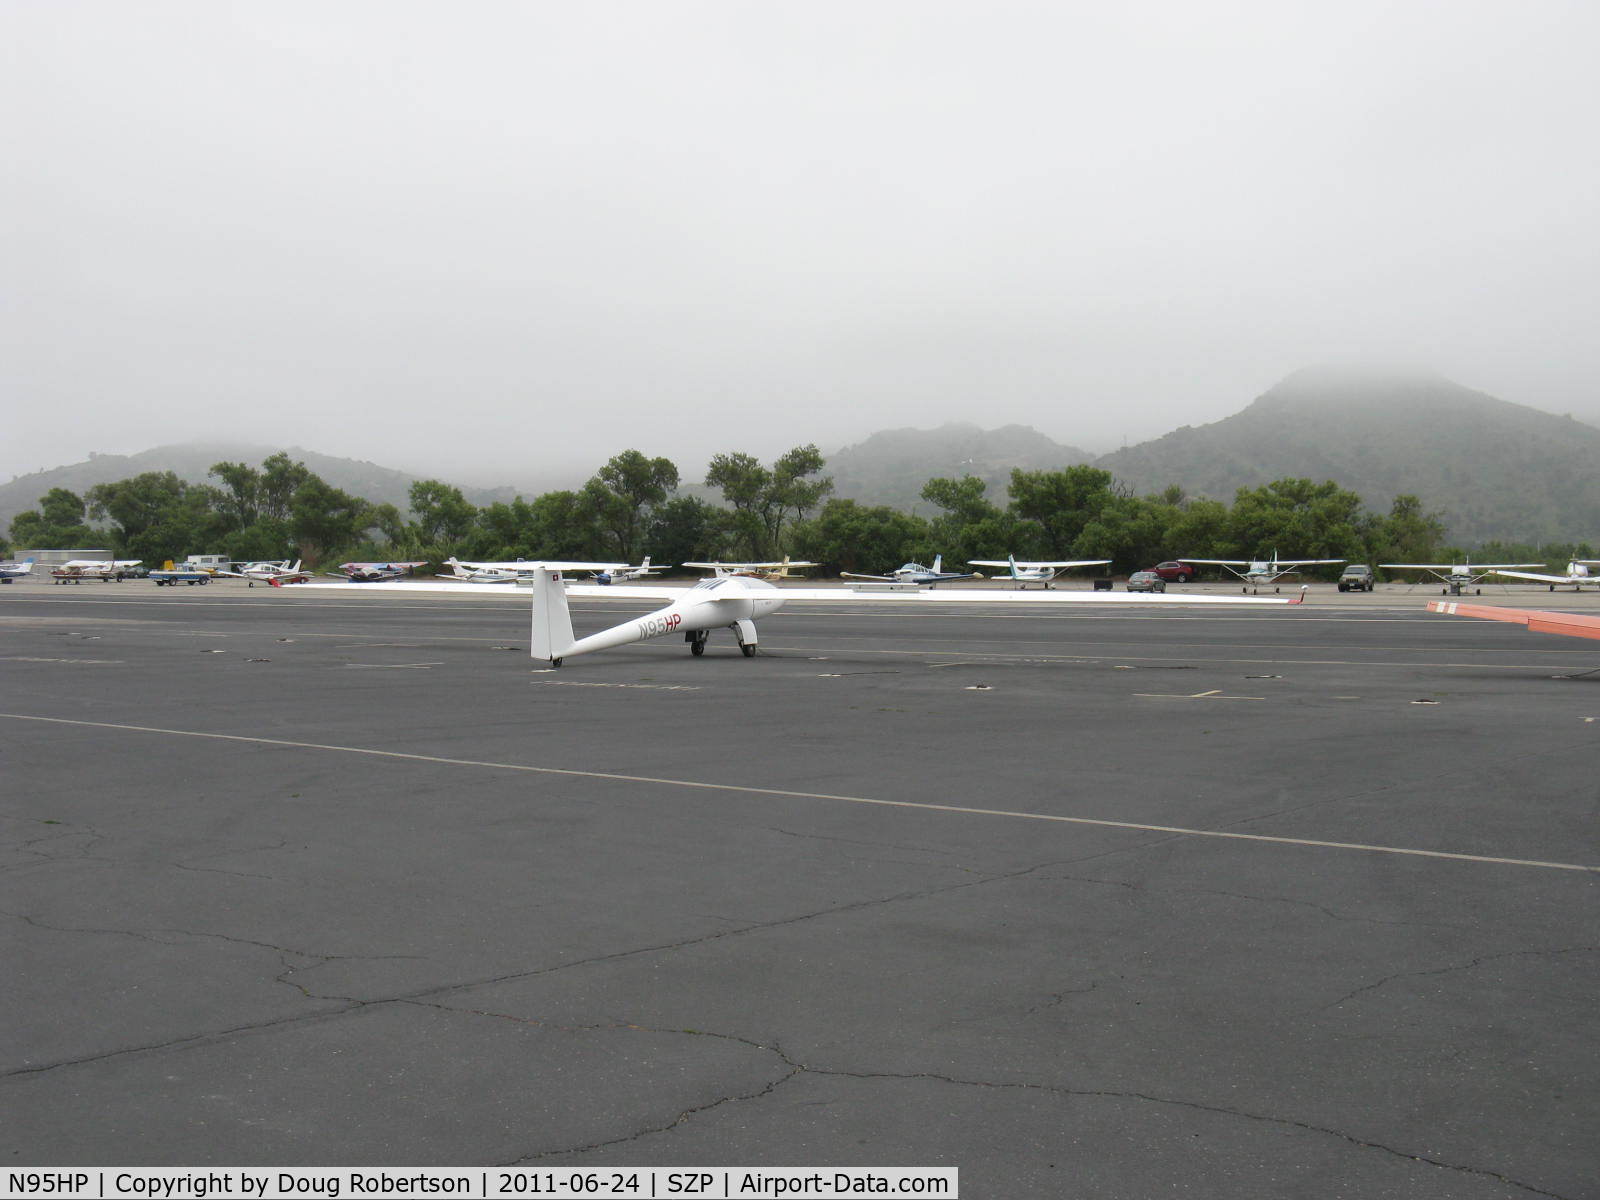 N95HP, 2000 Stemme S-10VT C/N 11-041, 2000 Stemme Gmbh & Co. S10-VT self-launching sailplane, Rotax Supercharged 914 F2/S1 113.5 Hp, 2-blade variable pitch fully retracting in nosecone prop